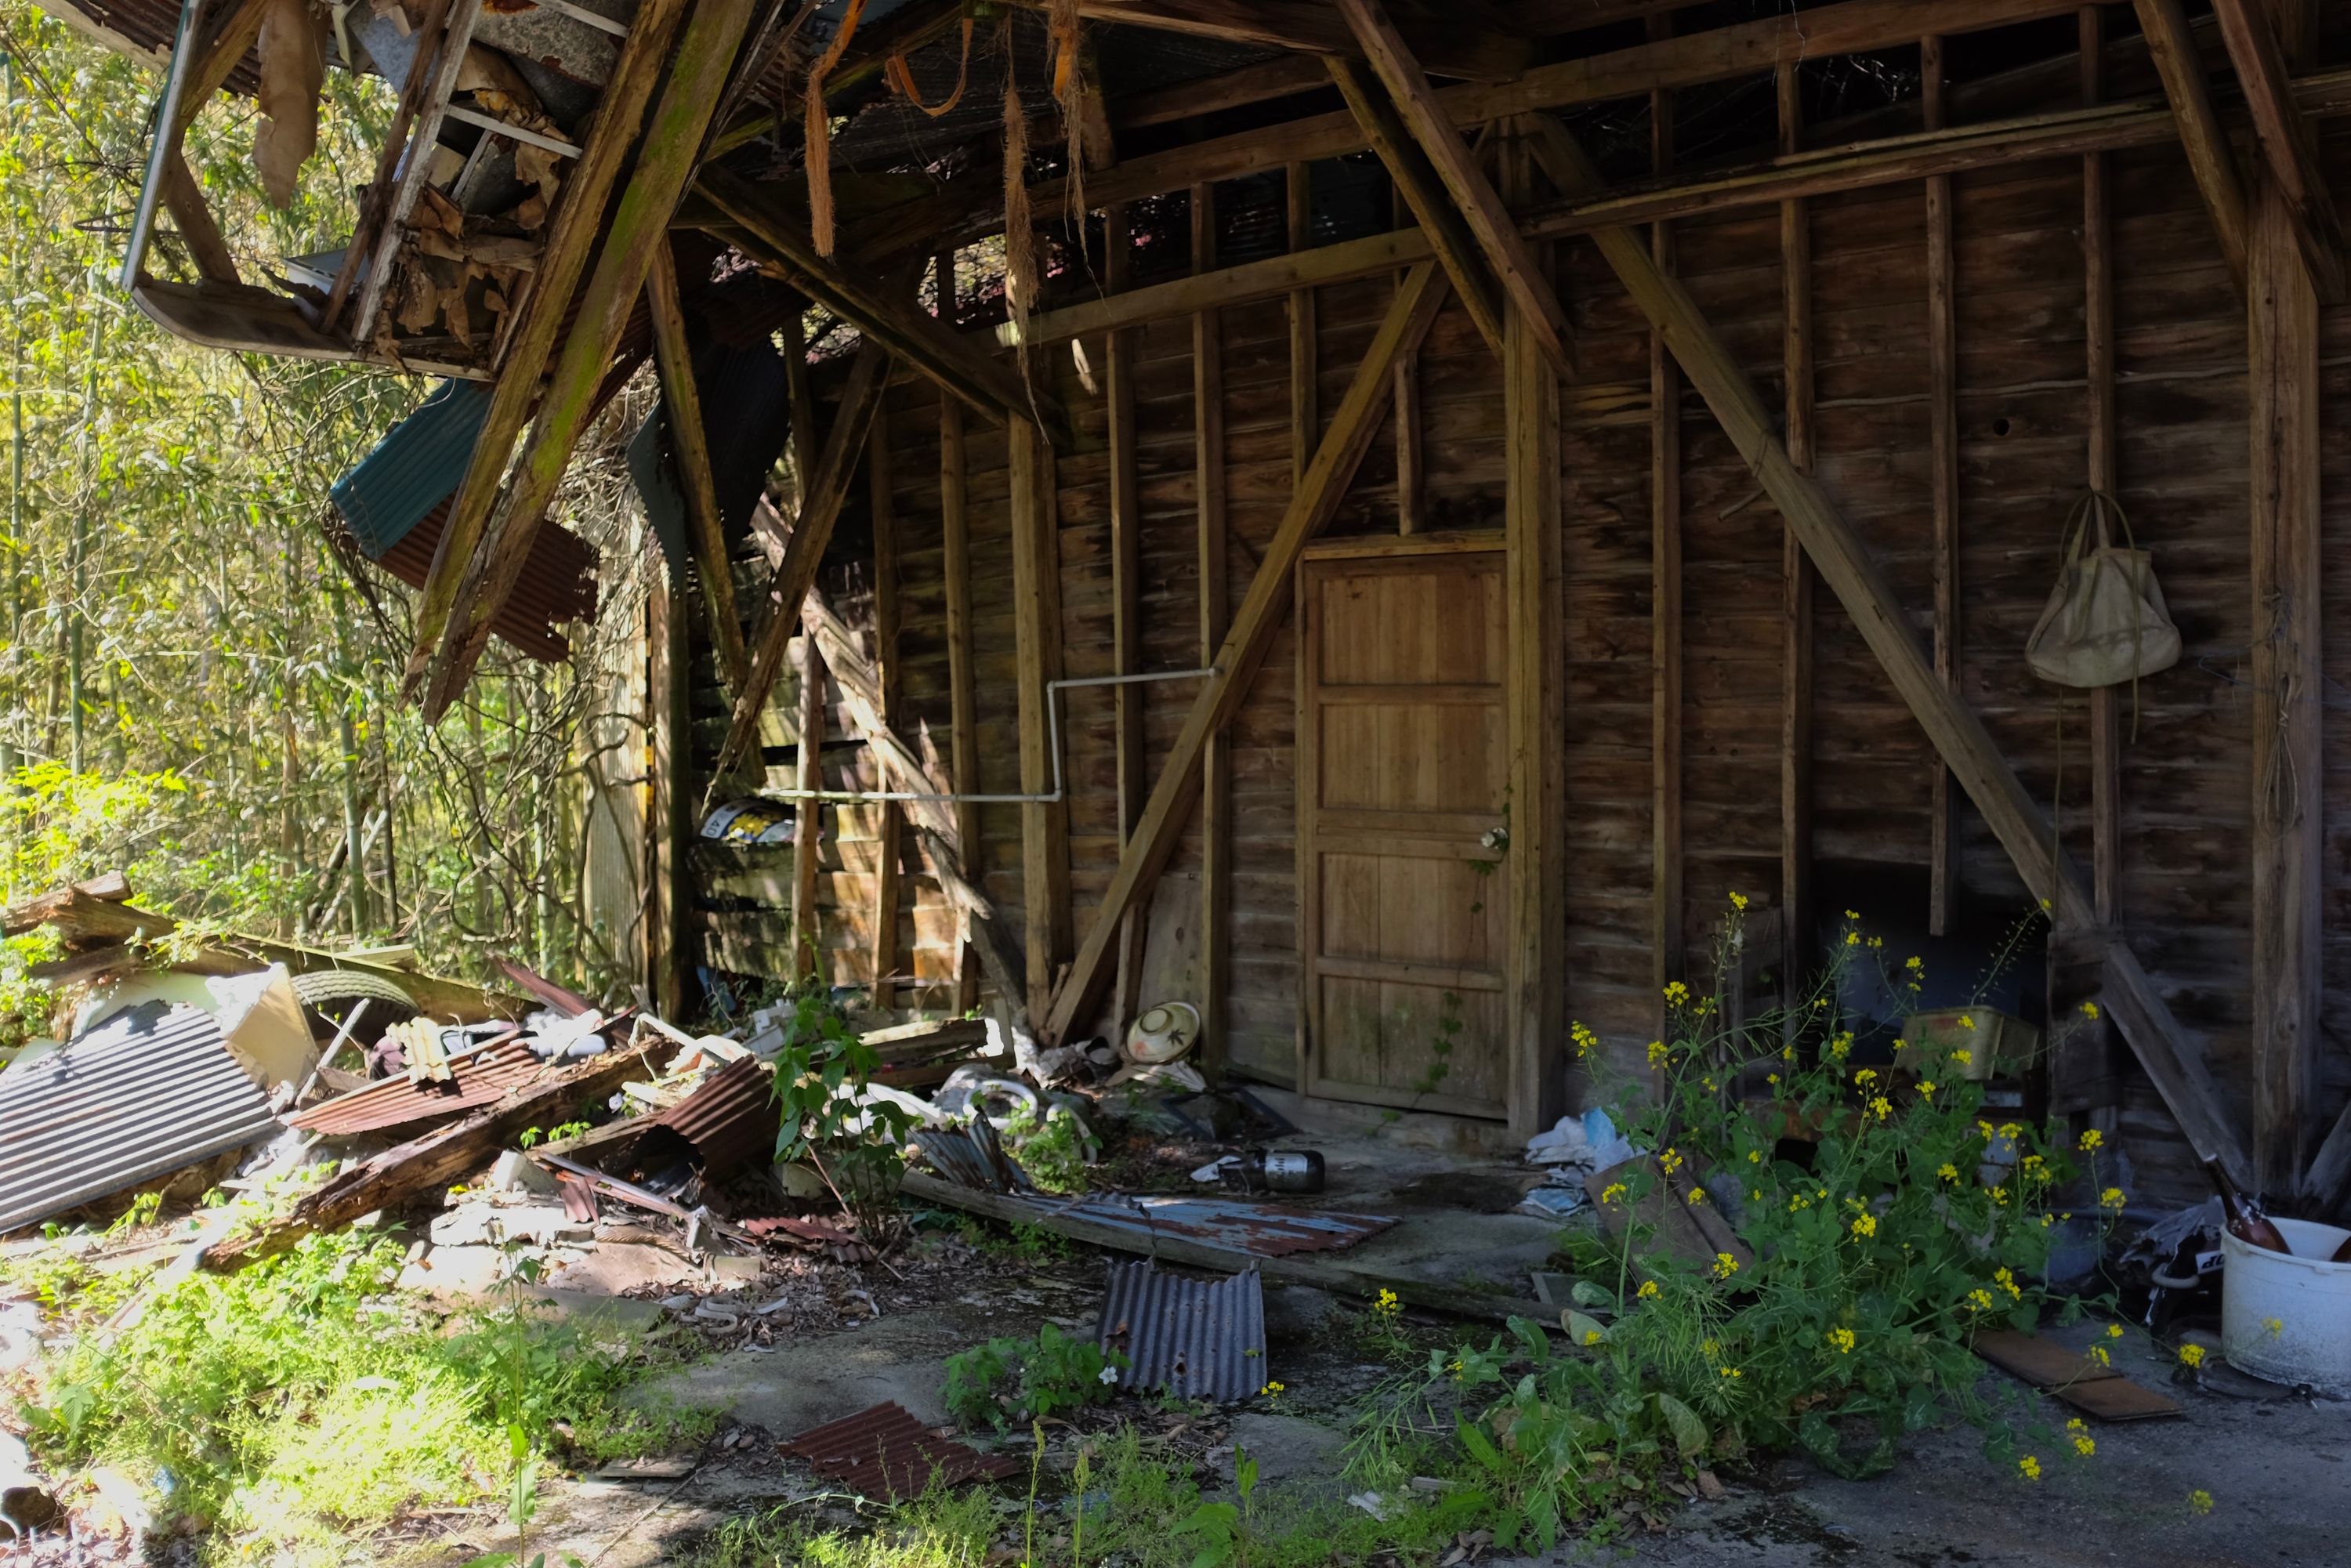 The porch of a dilapidated house.